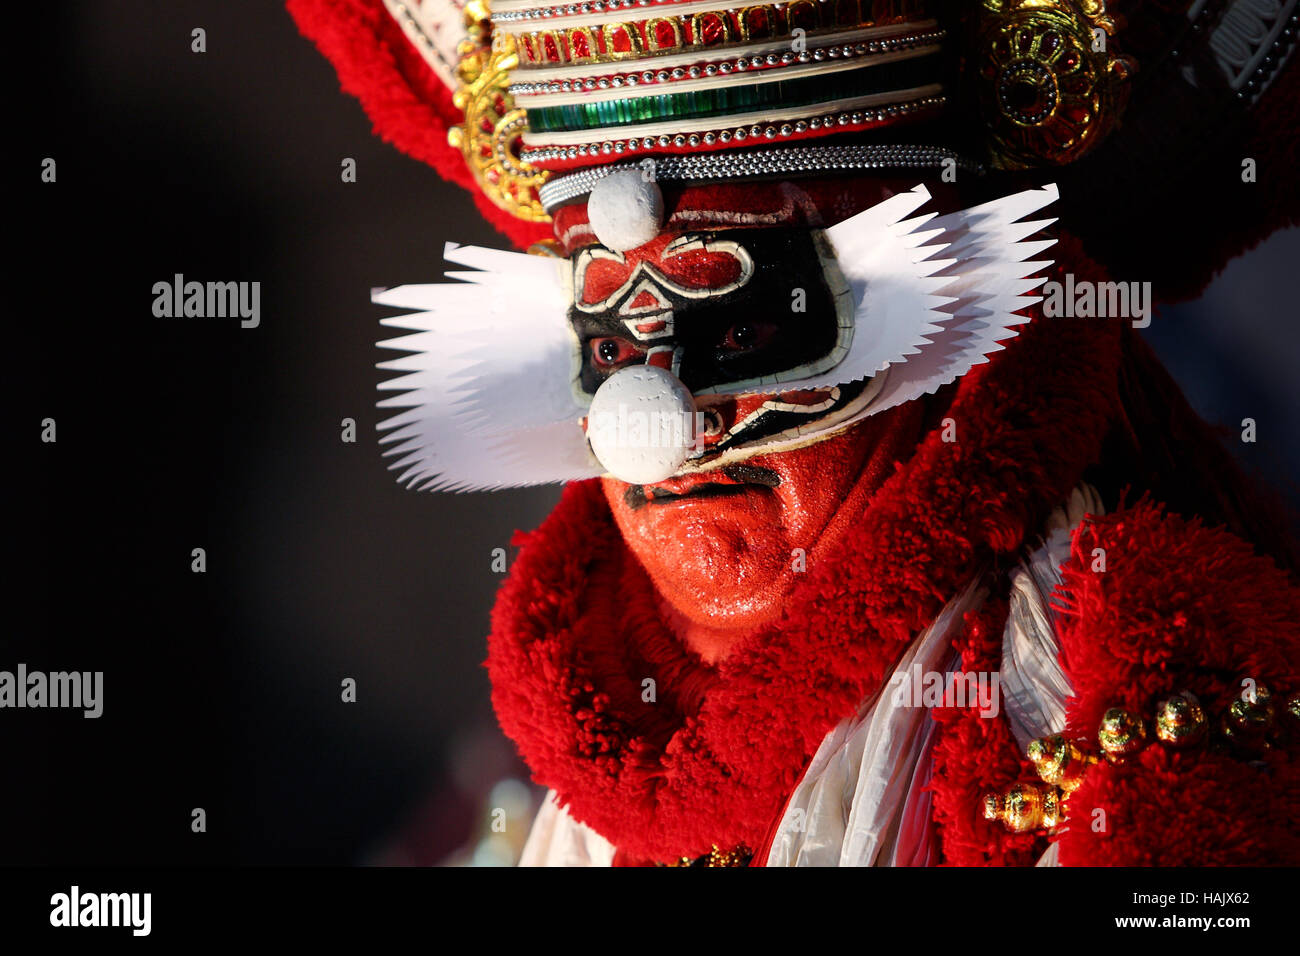 Kathakali dancer with a red face mask and make up usually worn by performers portraying villains Stock Photo